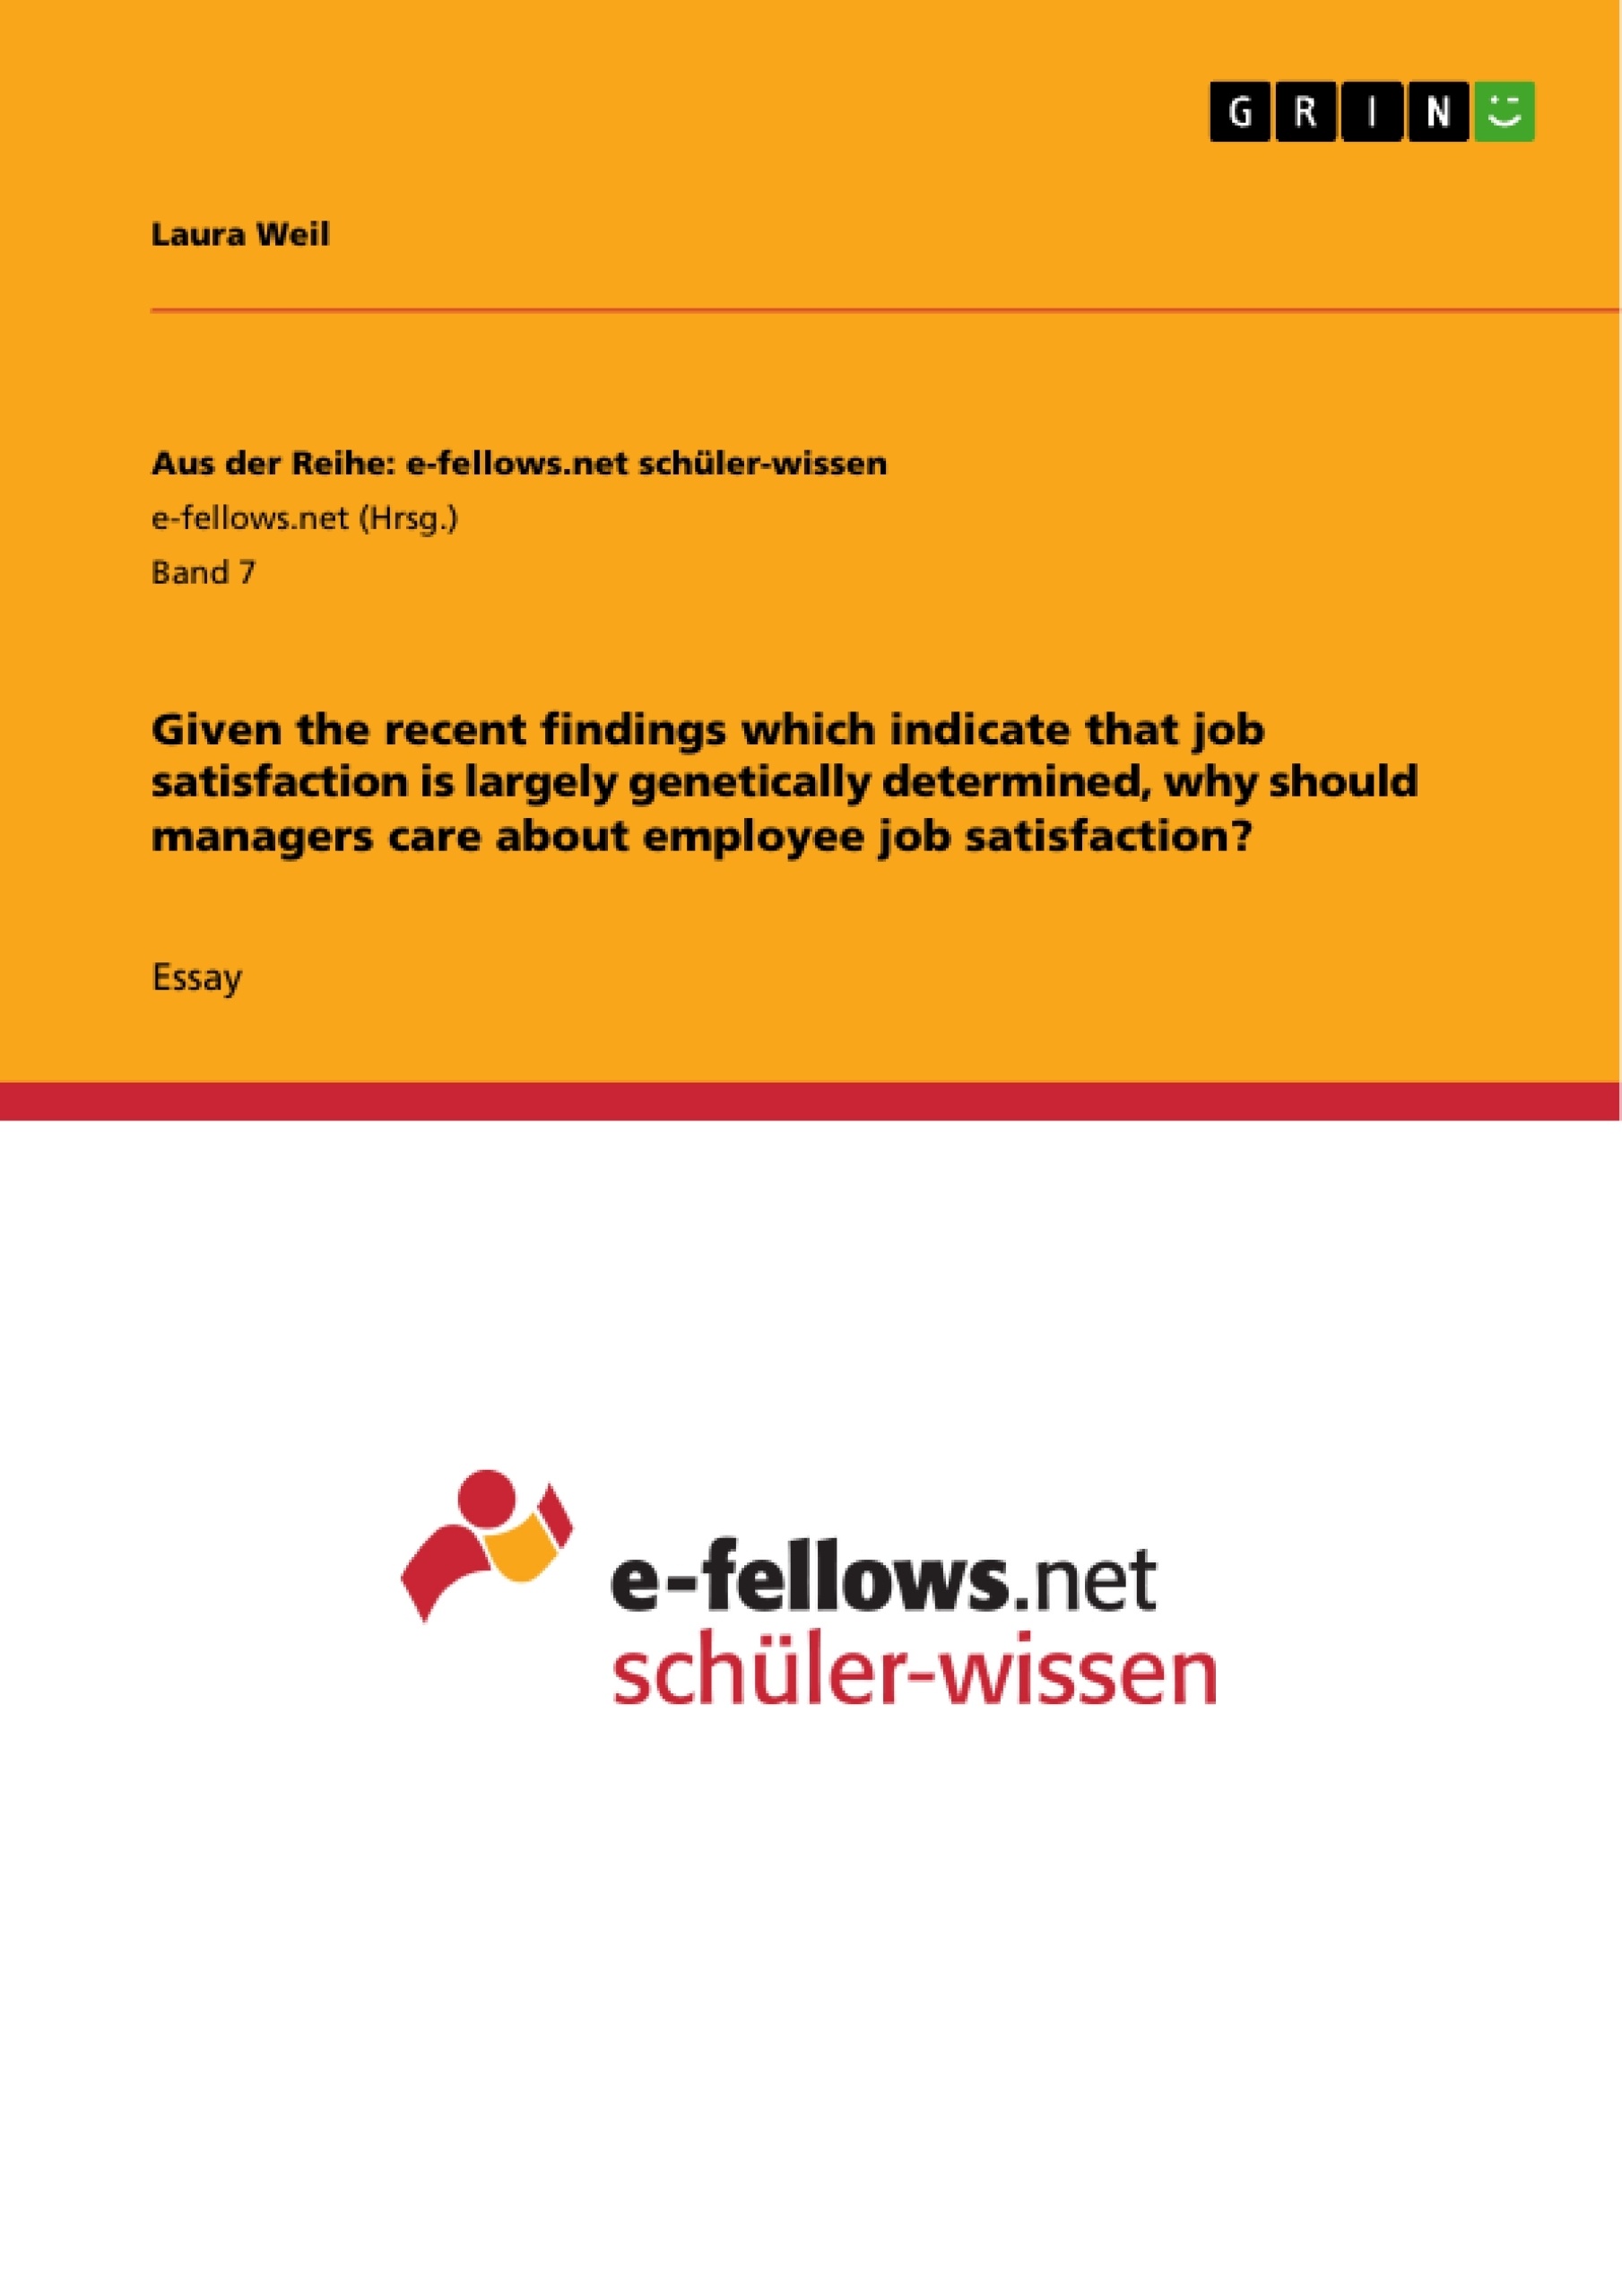 Título: Given the recent findings which indicate that job satisfaction is largely genetically determined, why should managers care about employee job satisfaction?